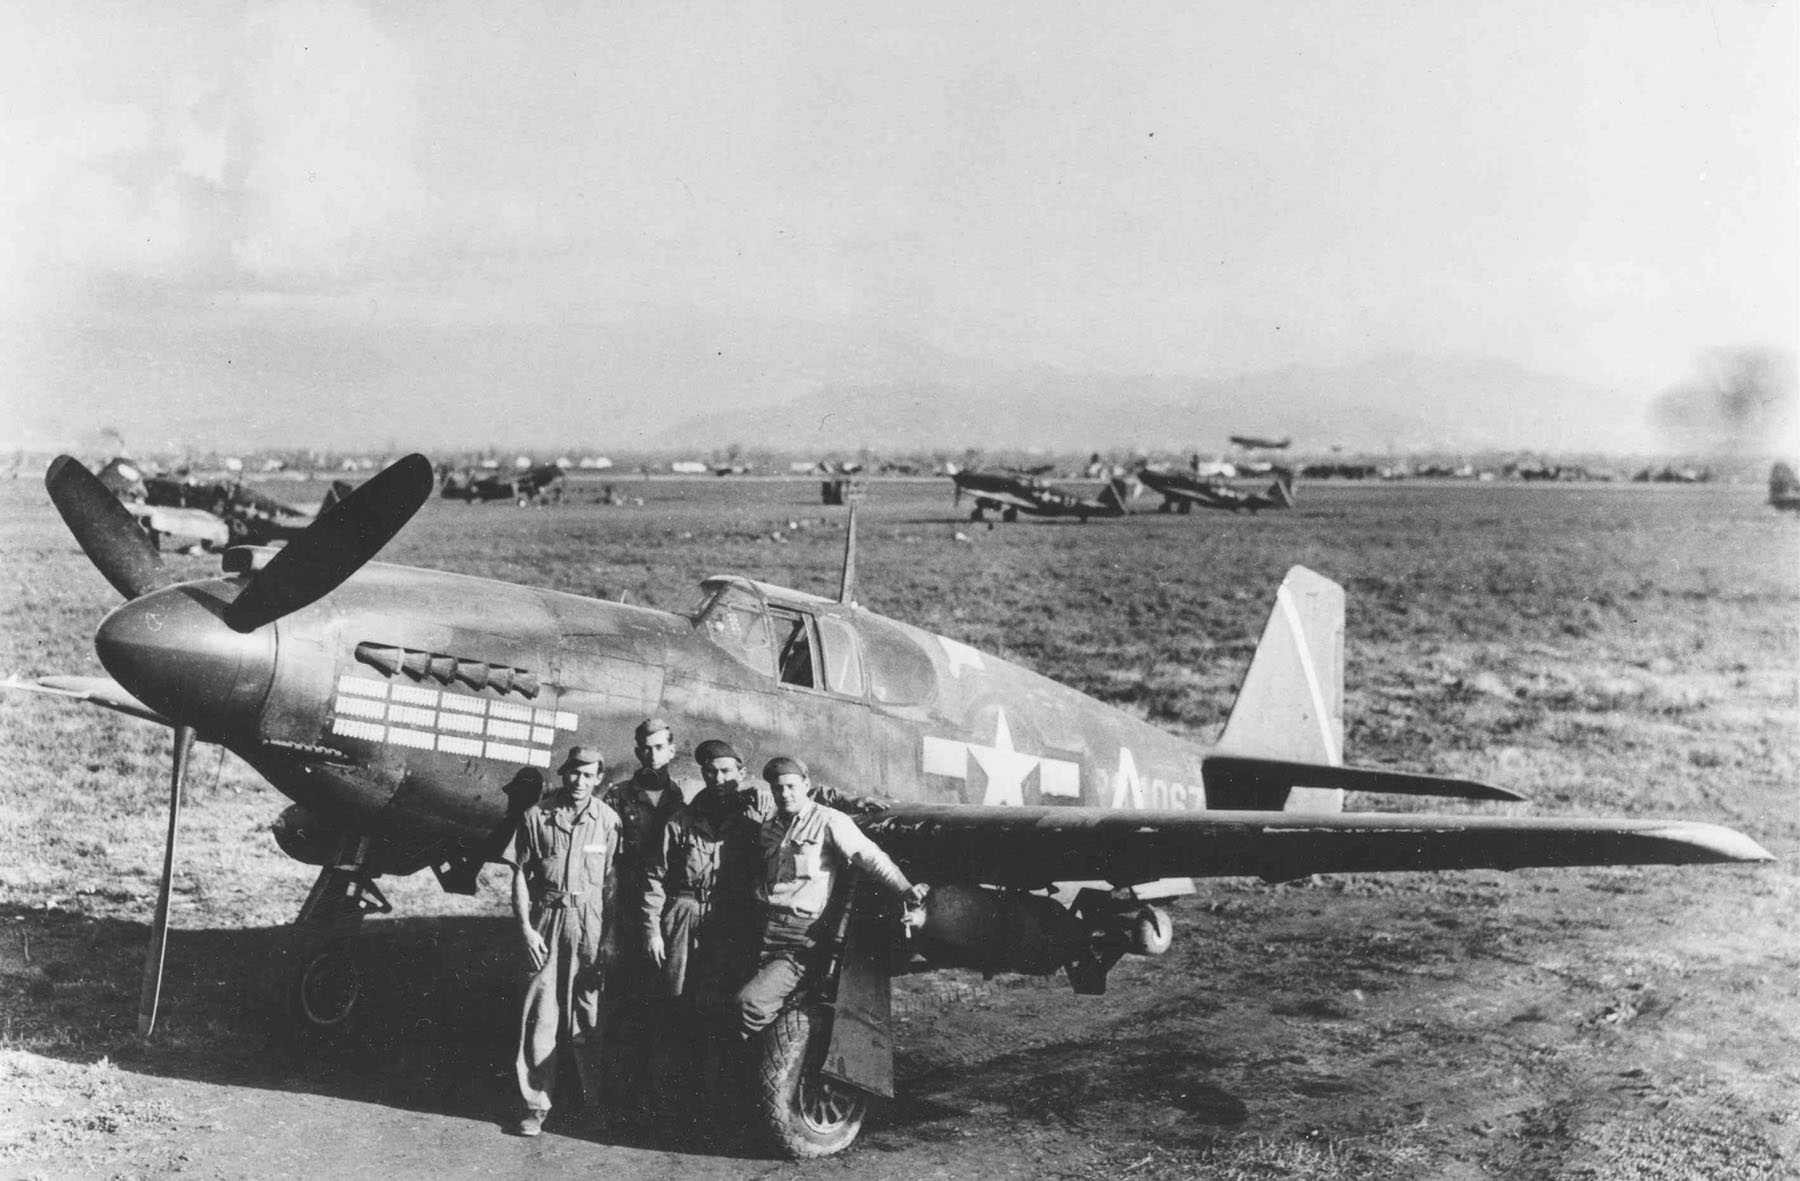 A-36A Mustang aircraft 42-84067 of the 527th FBS, 86th BFG, Gaudo Airfield, southern Italy, 14 Jan 1944; note chin-mounted guns and the bombing mission markings on the cowl